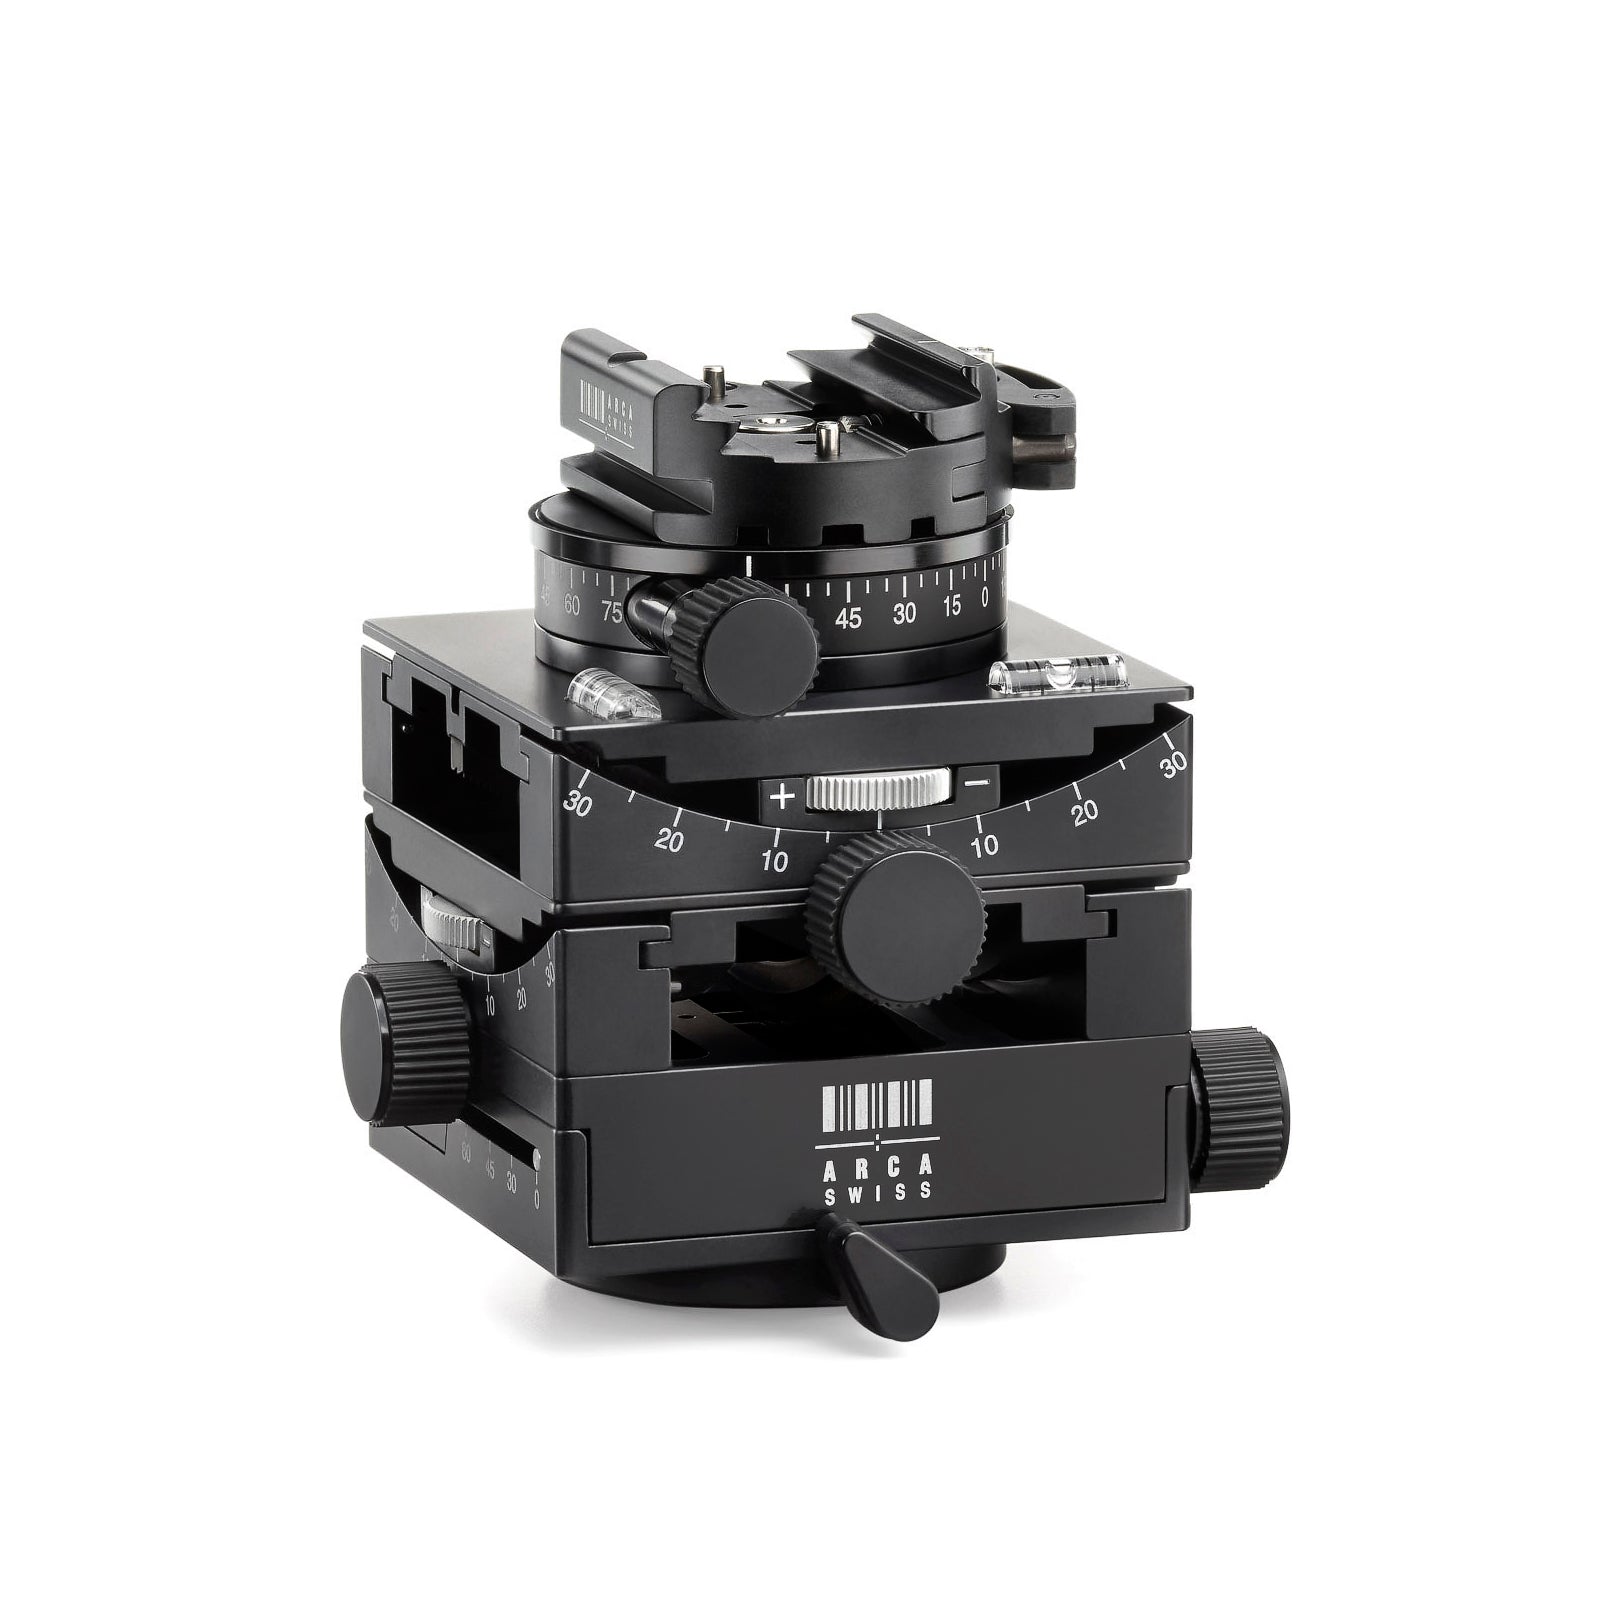 Arca-Swiss C1 Cube gp tripod head, with flipLock quick release, 3/4 front view photograph for the geared panning model 8501300.1